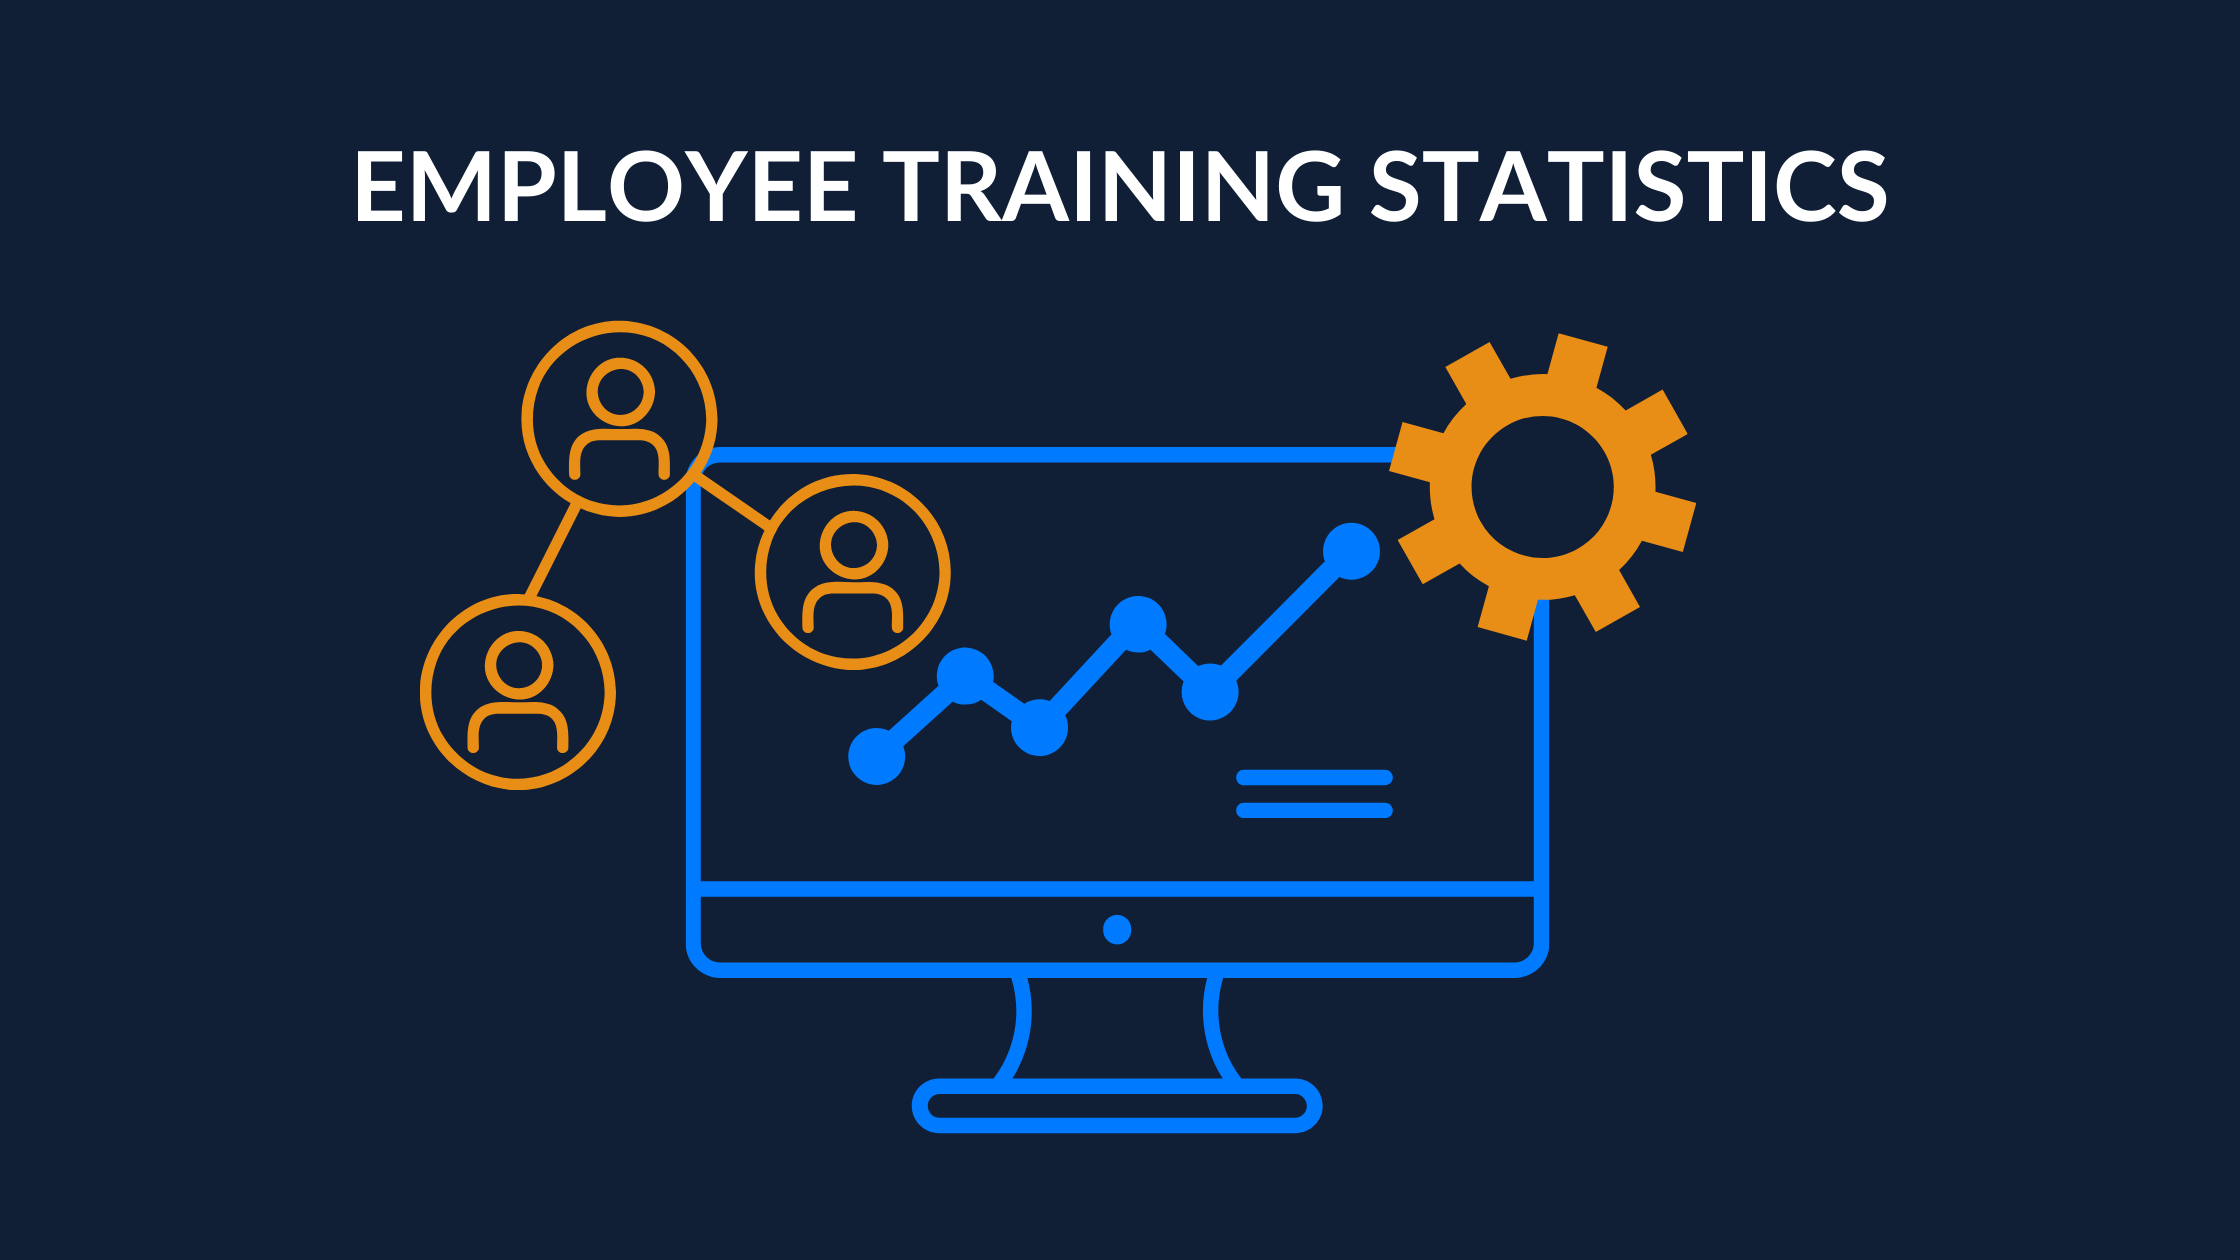 39 Statistics that Prove the Value of Employee Training